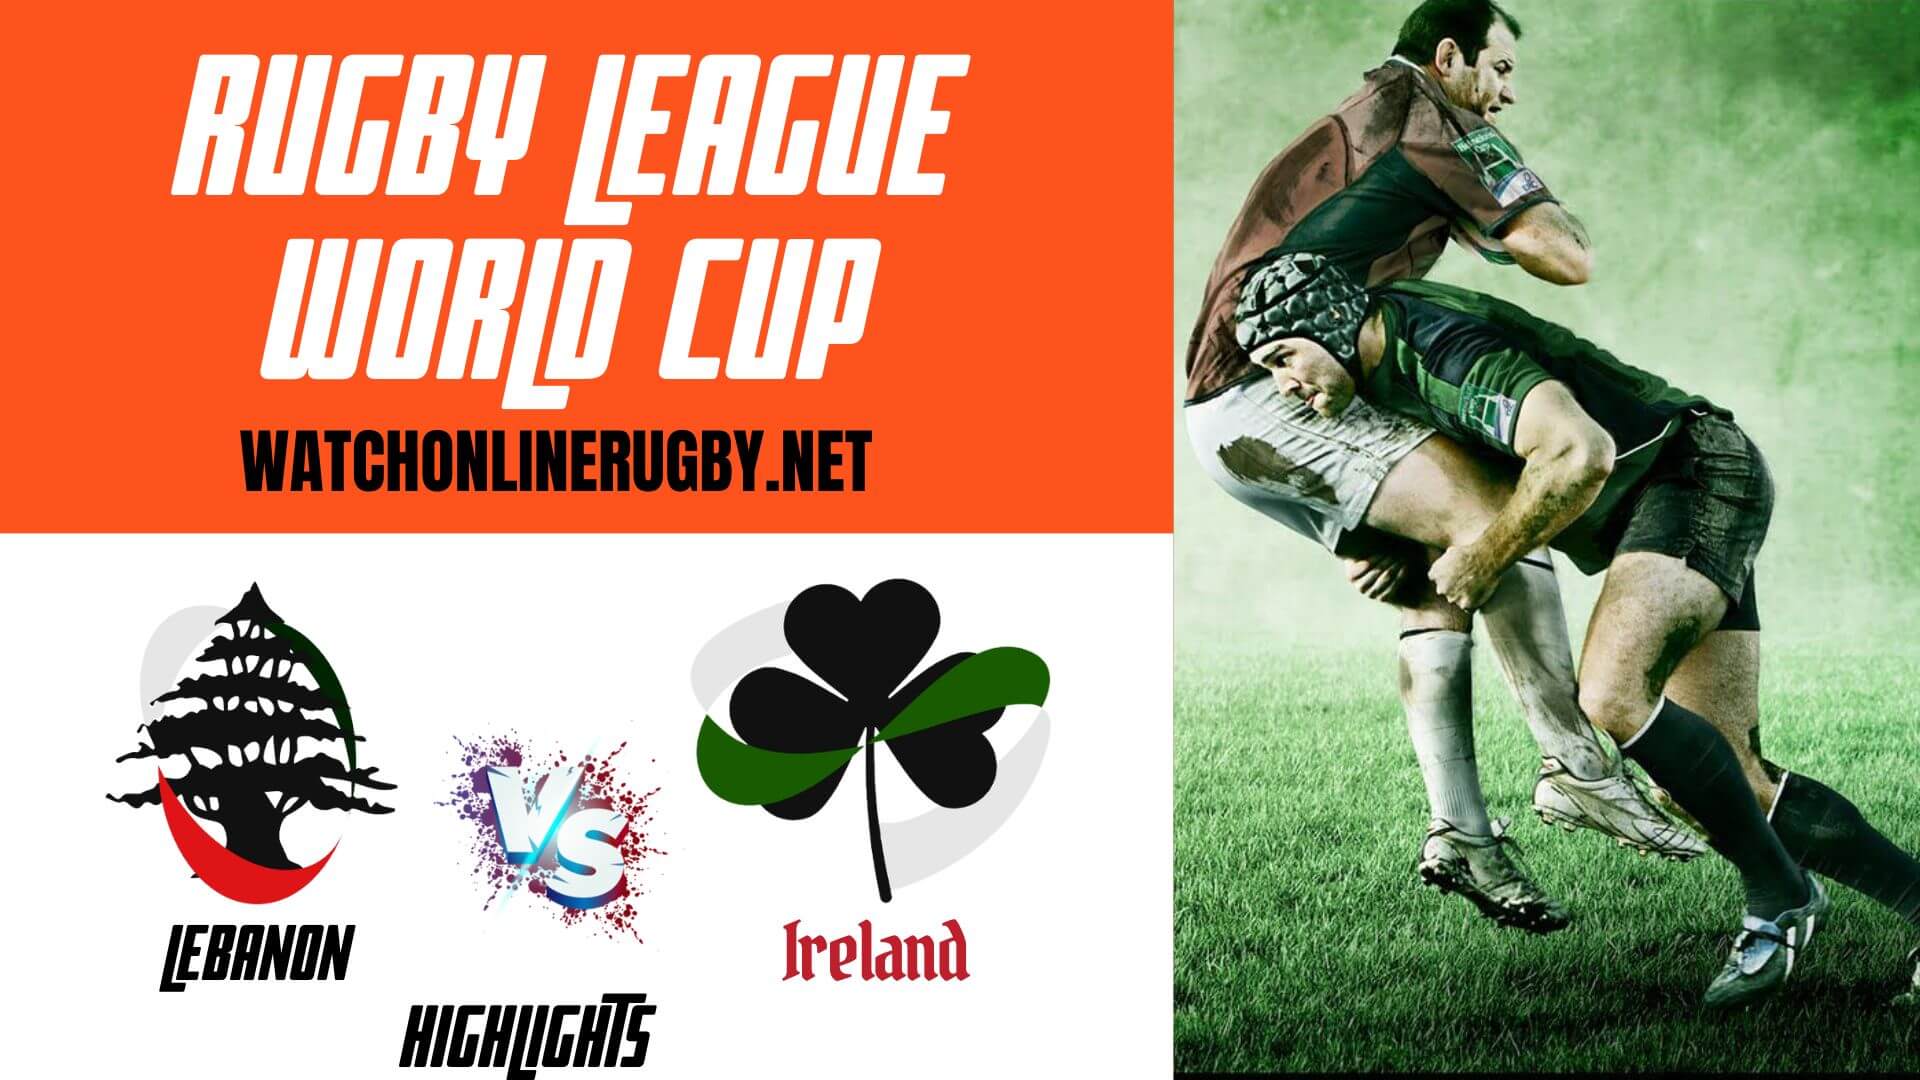 Lebanon Vs Ireland Rugby League World Cup 2022 RD 2